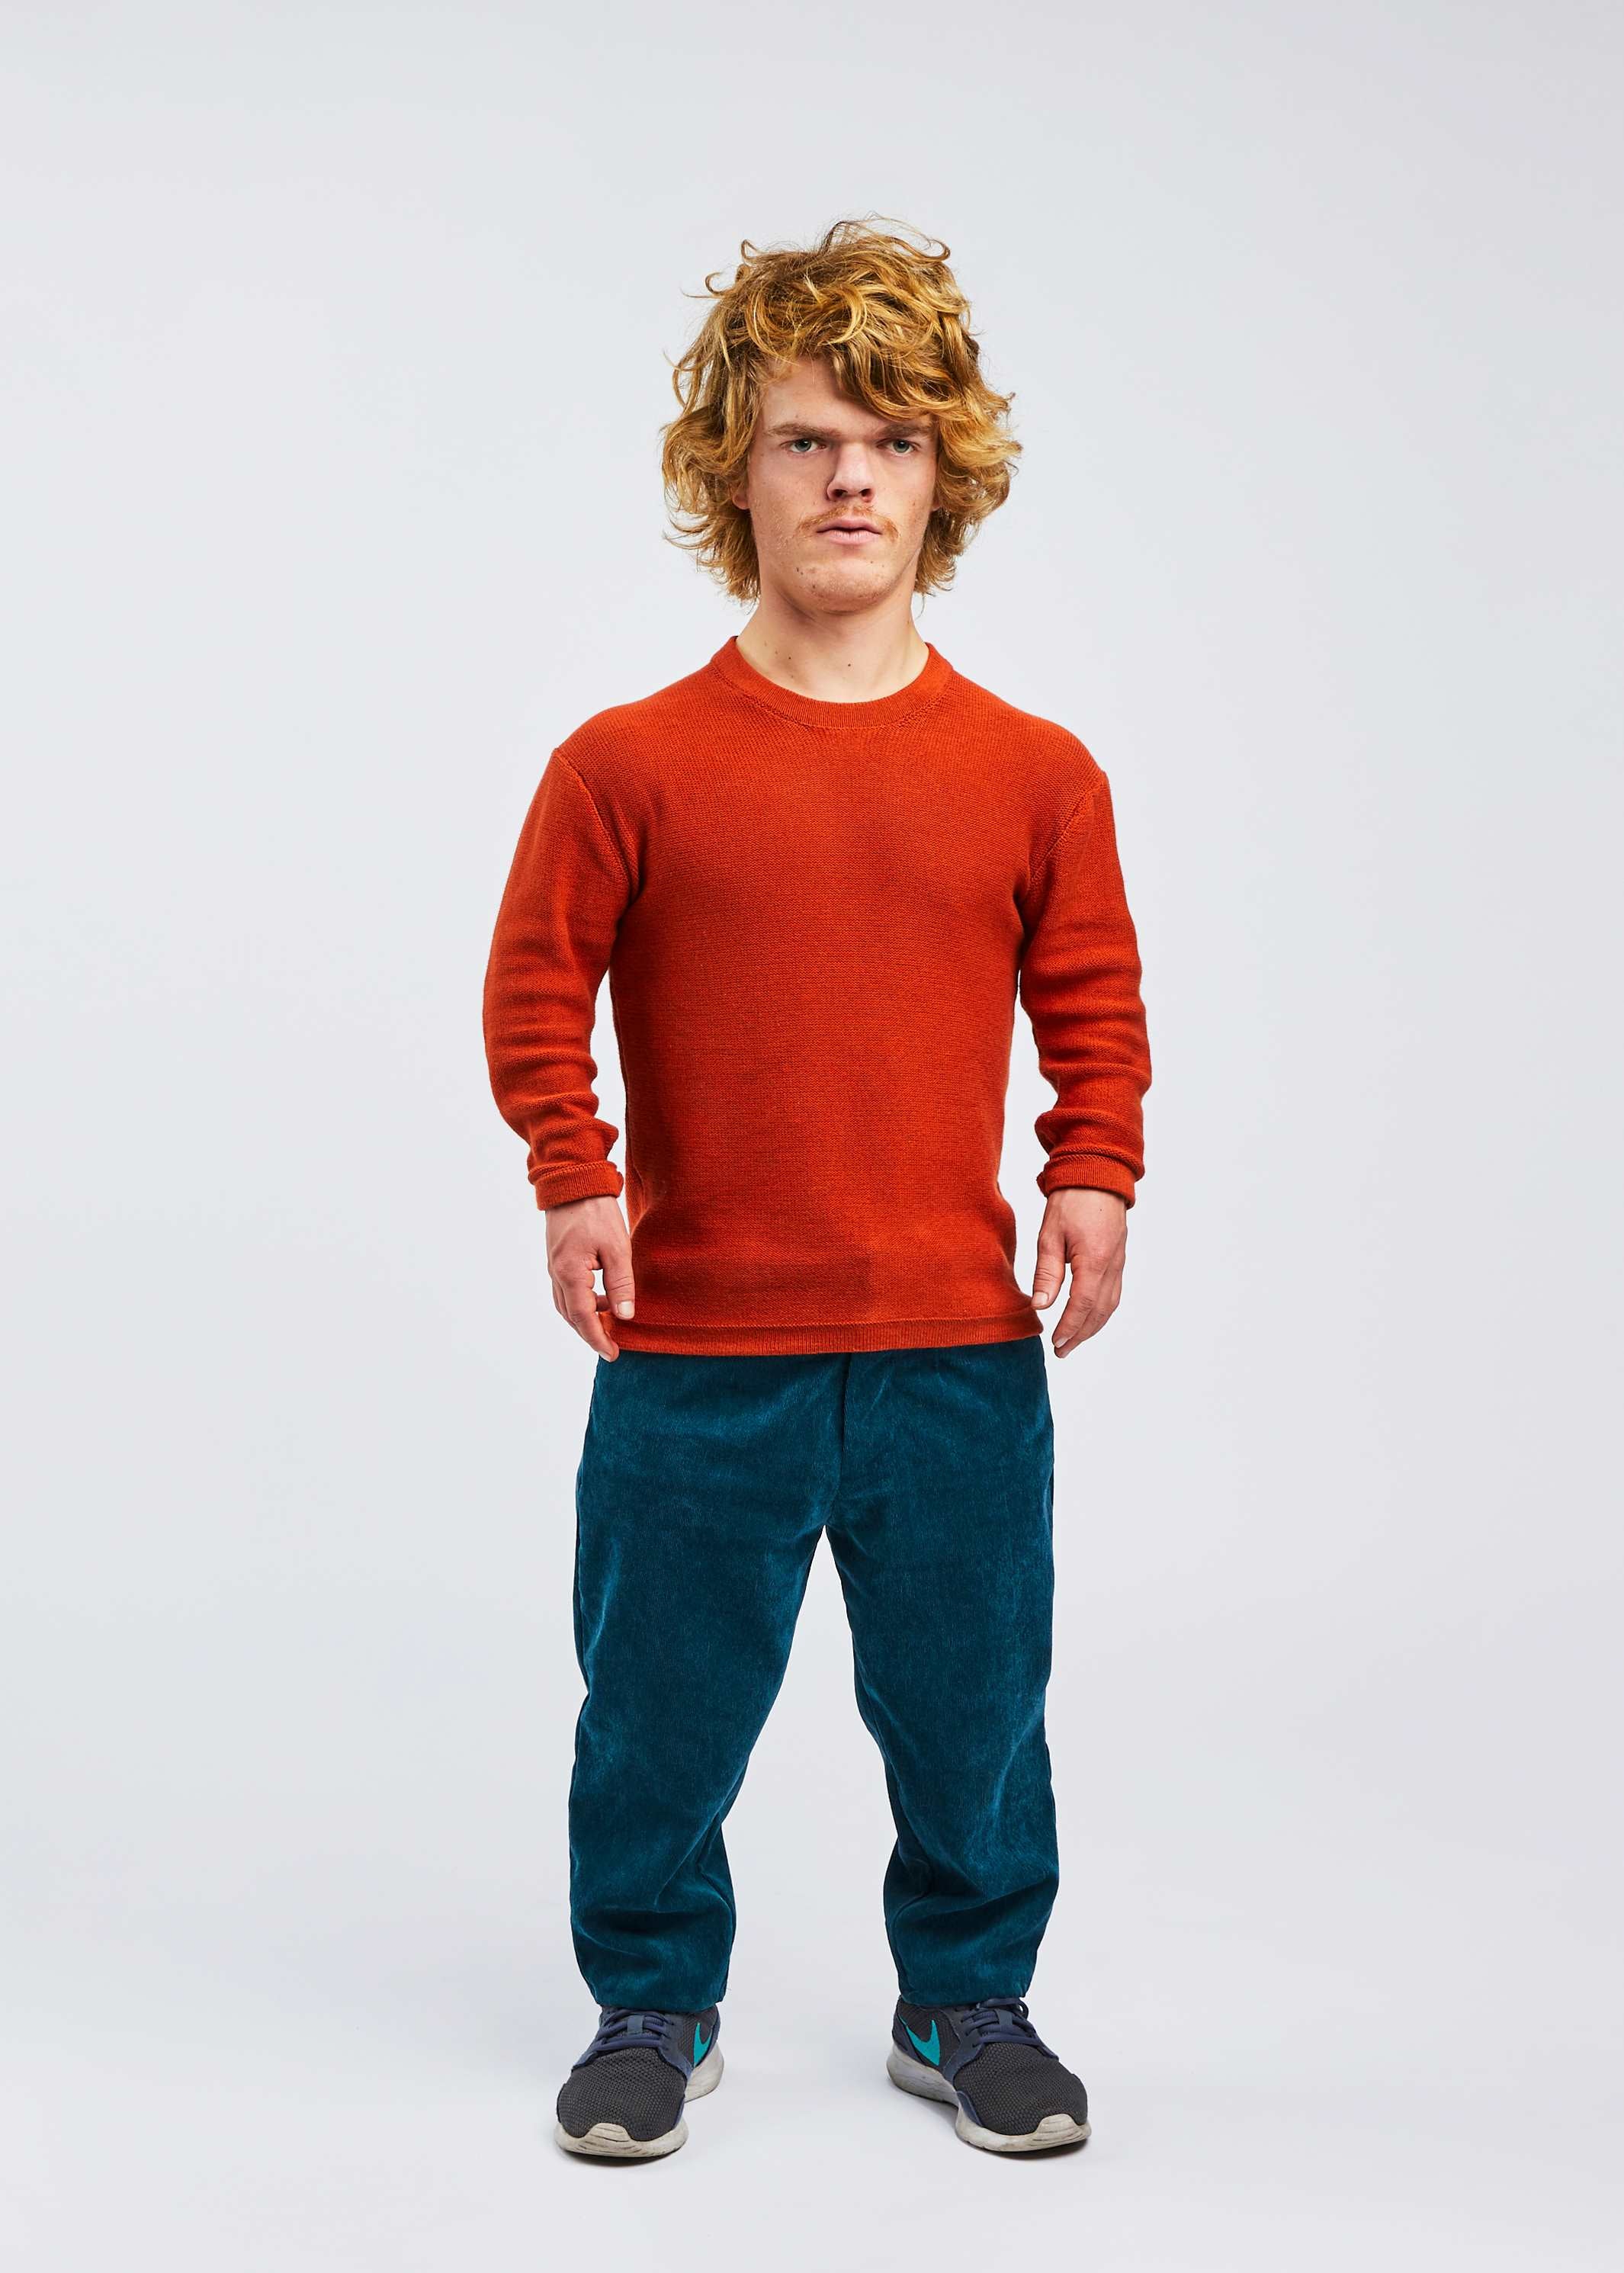 man with dwarfism wearing red pullover and blue corduroy pants